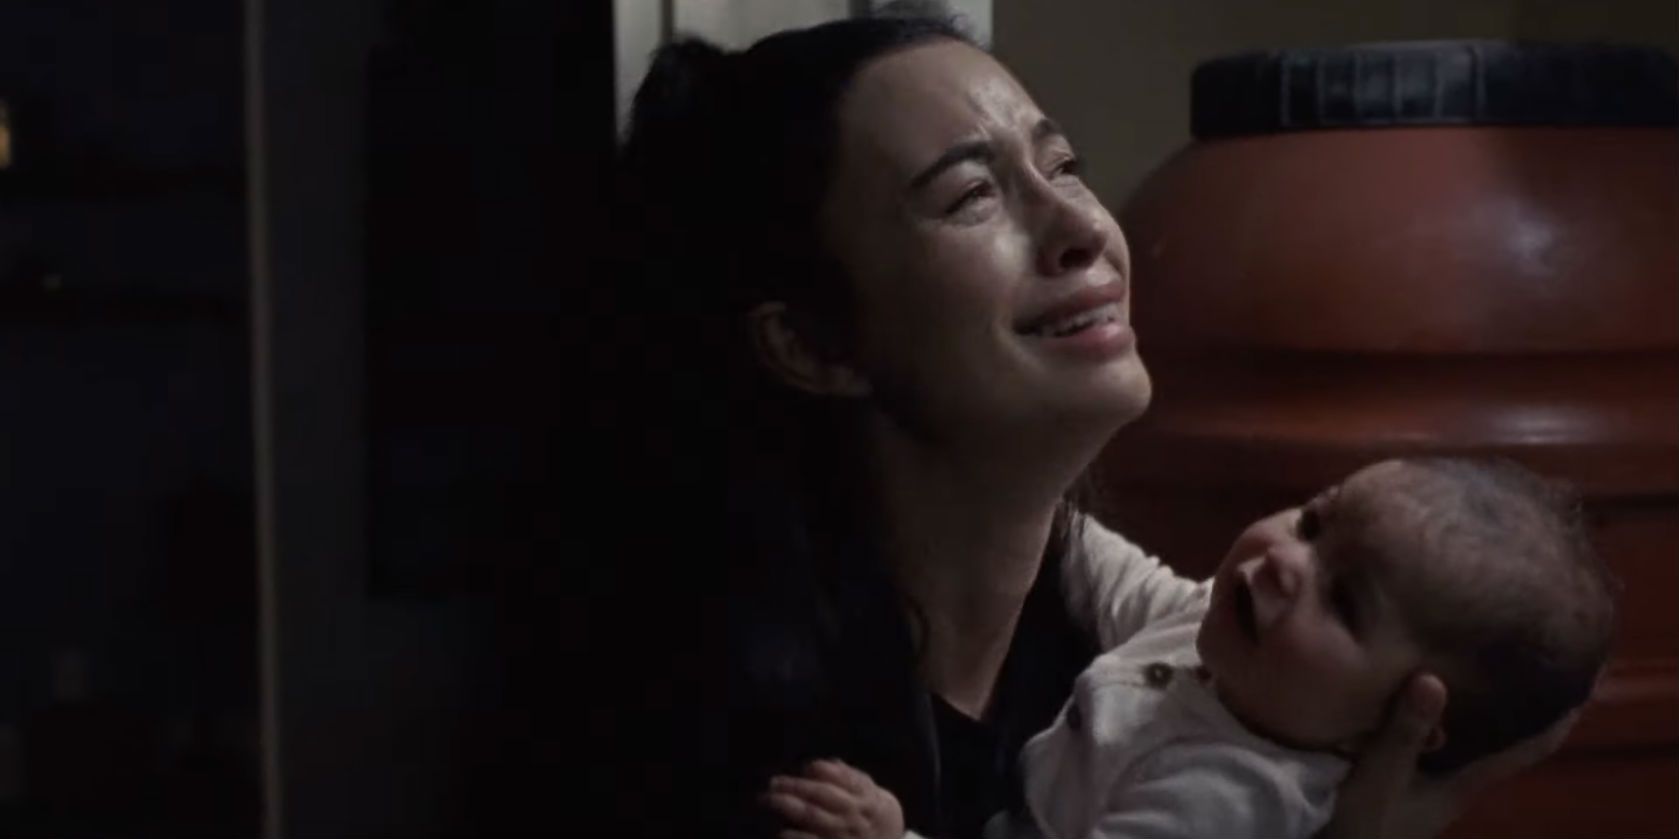 Rosita and her baby in The Walking Dead season 10 trailer